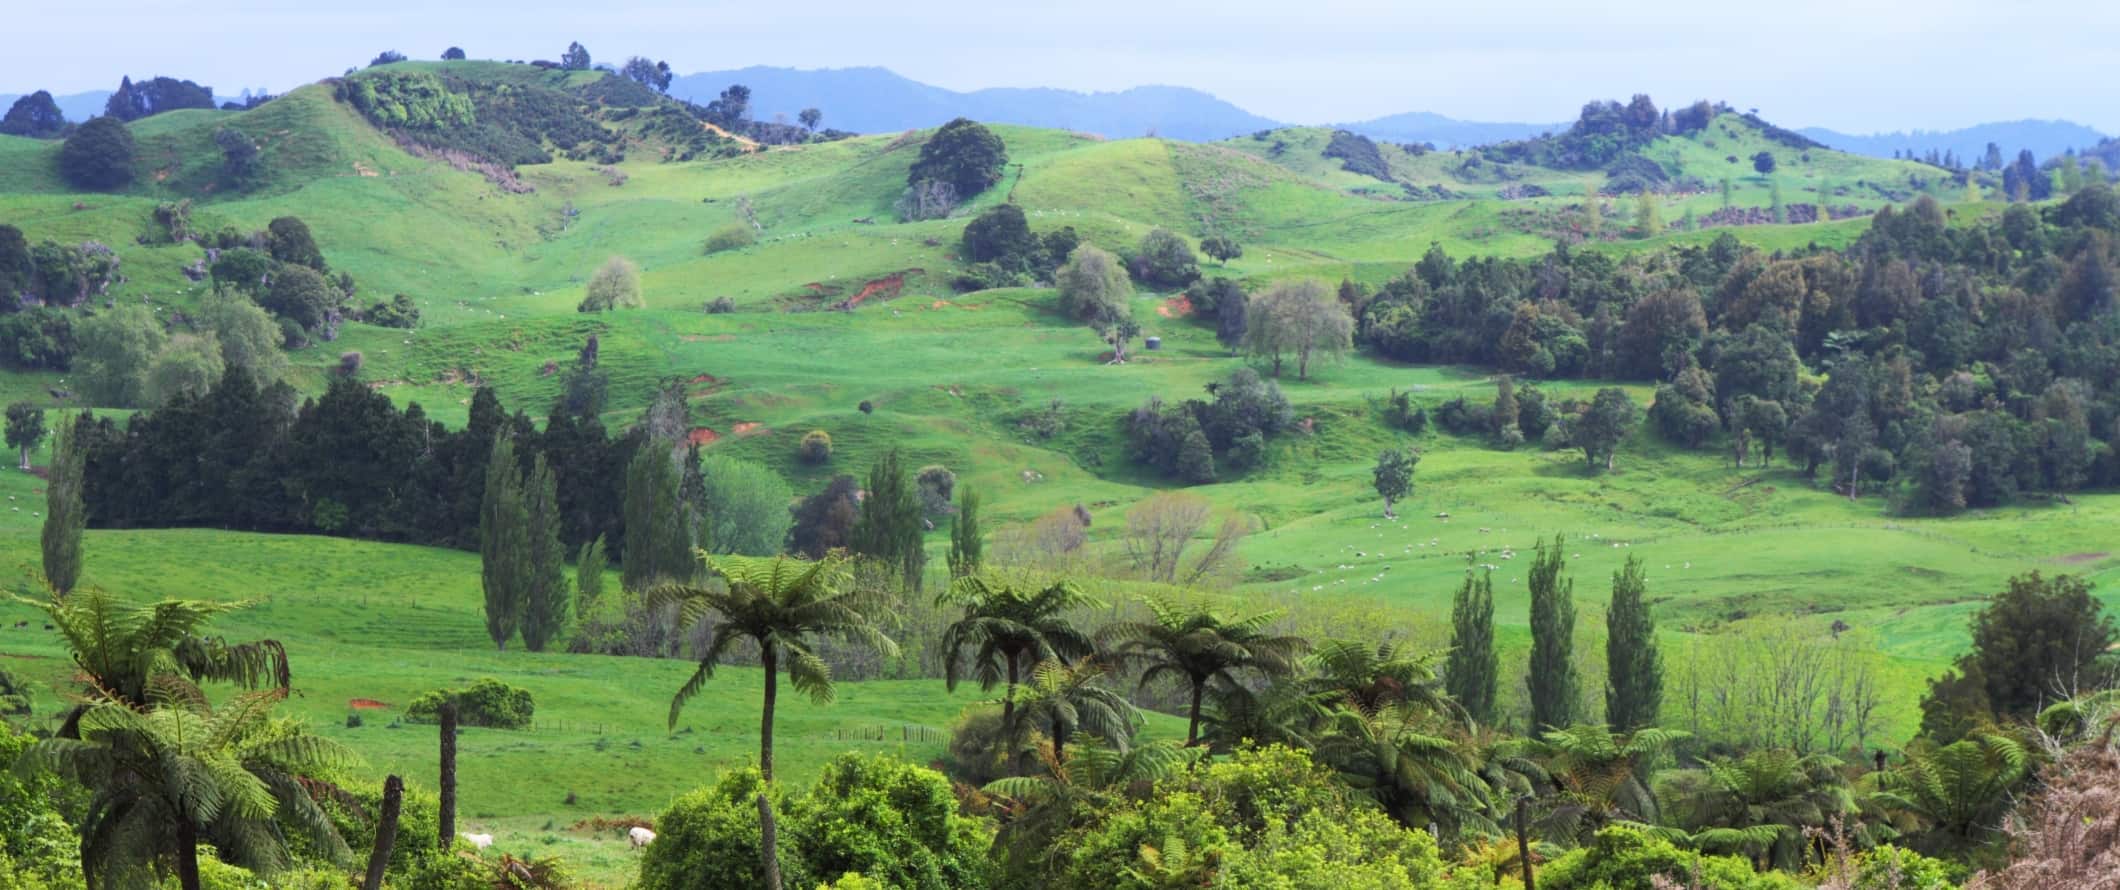 Lush valley with rolling green hills and palm tress in Waitomo, New Zealand.